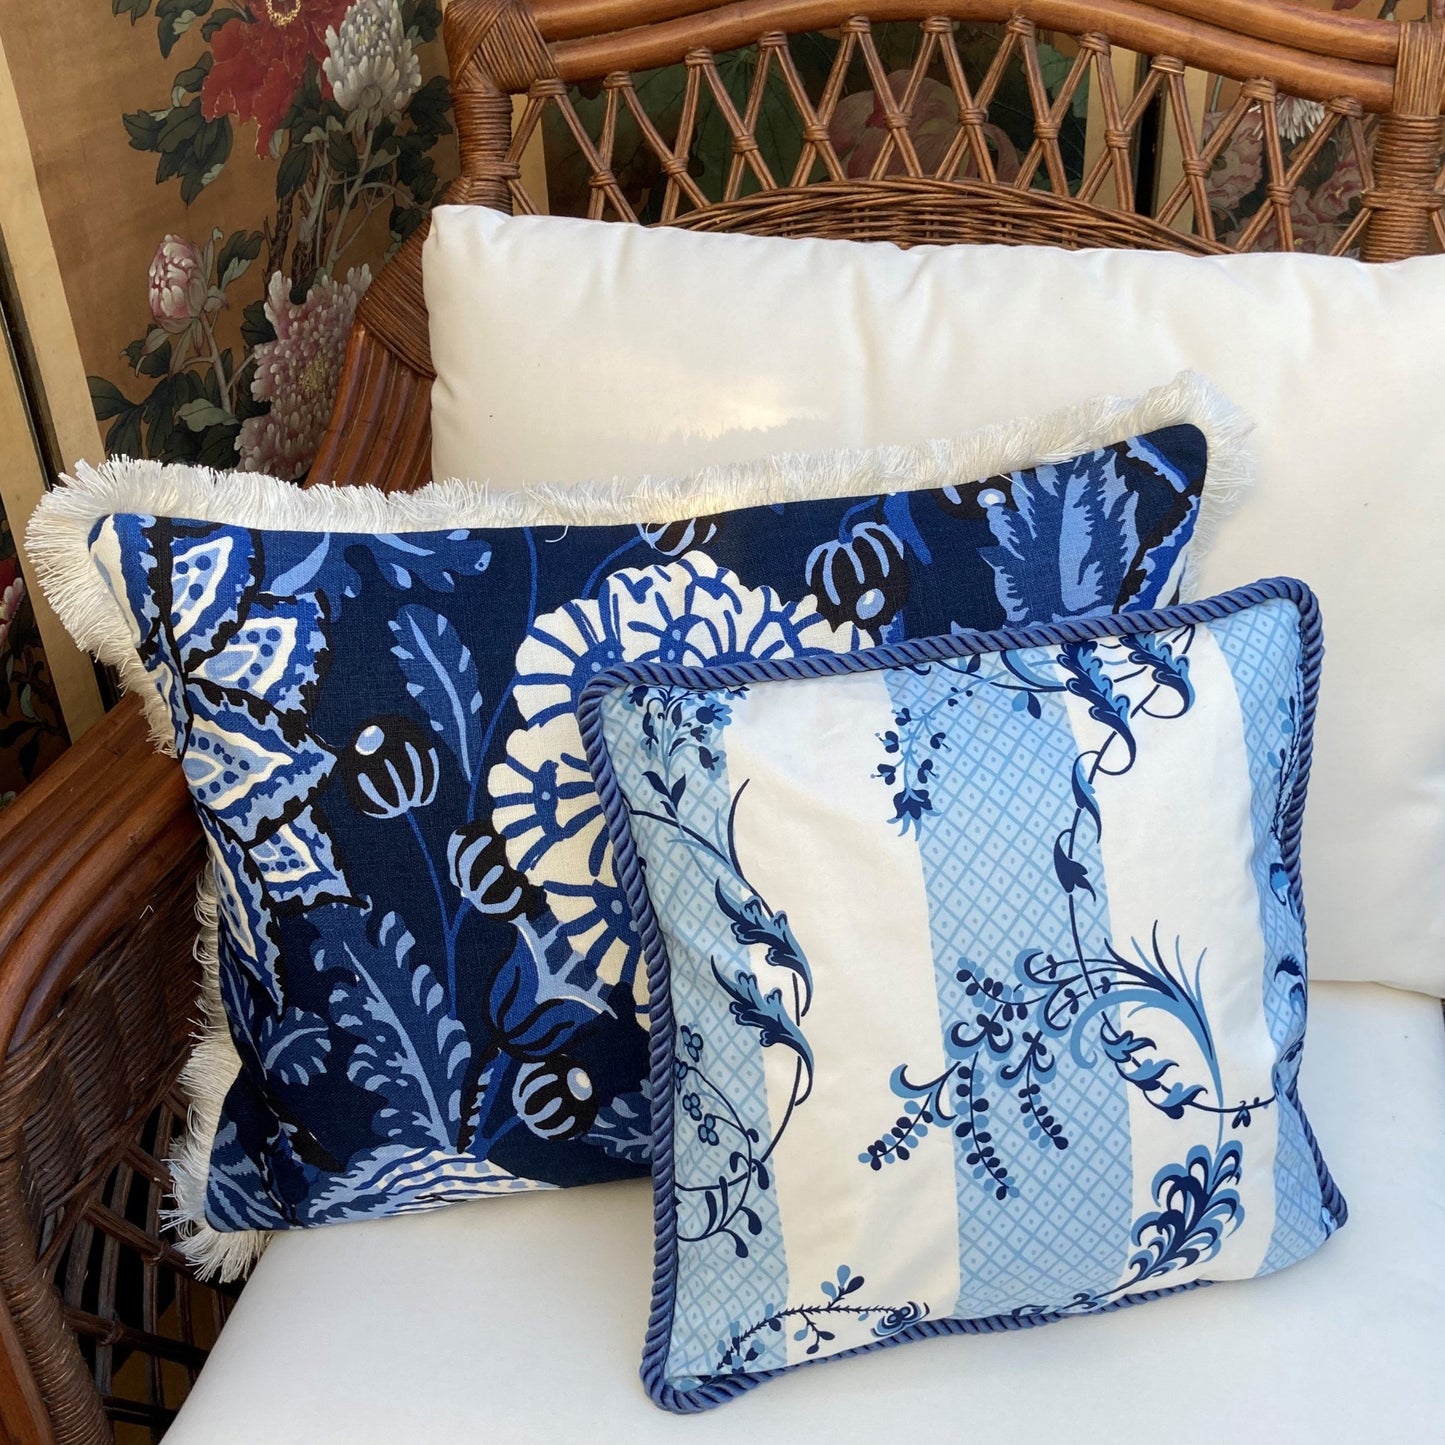 Mitford Blue and White 17 X 23 Rectangle Lumbar Designer Pillow with Down Feather Insert on Chair